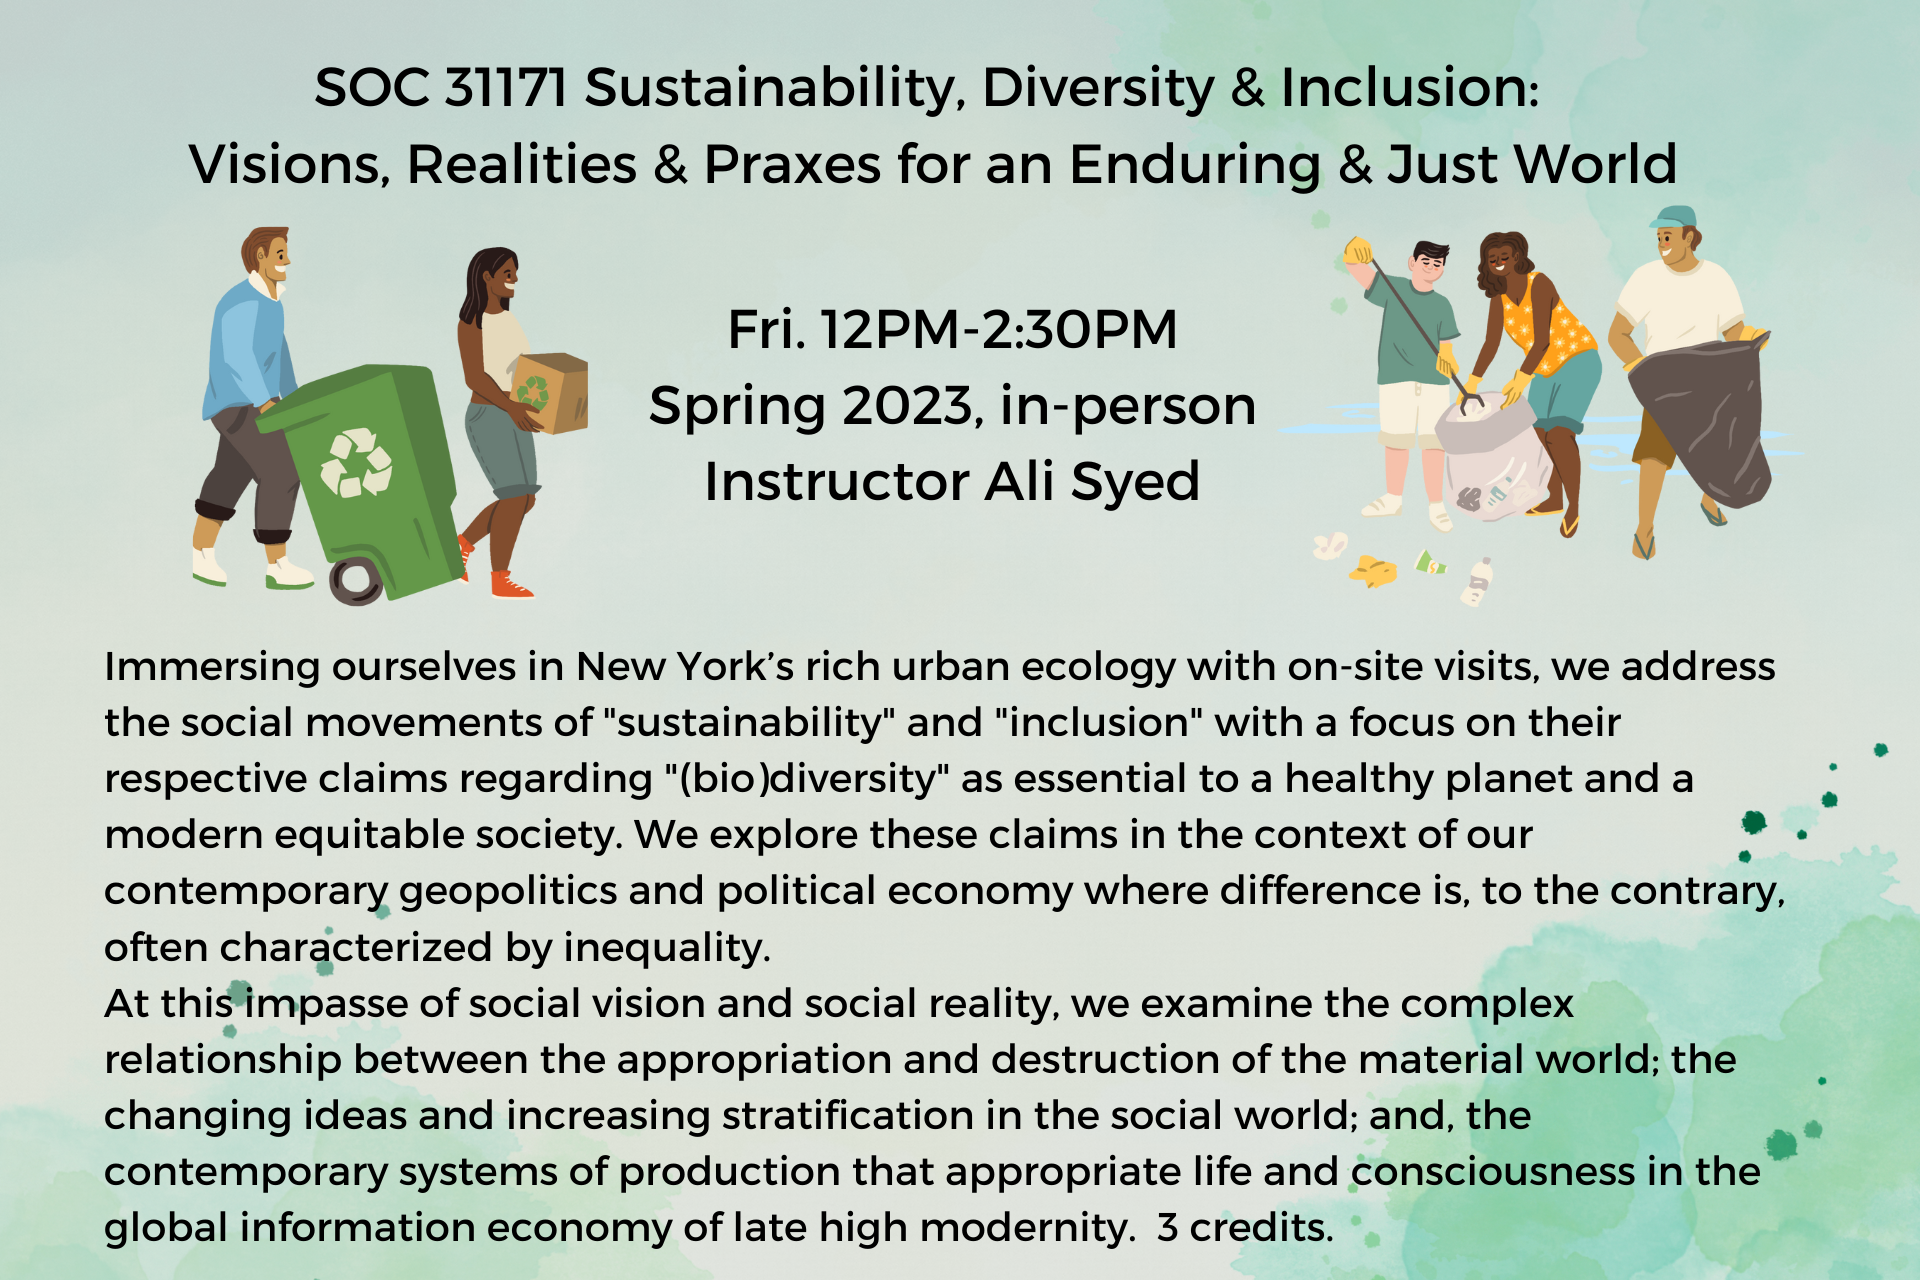 SOC31171 Sustainability, Diversity & Inclusion: Visions, Realities & Praxes for an Enduring & Just World Spring 2023 Course